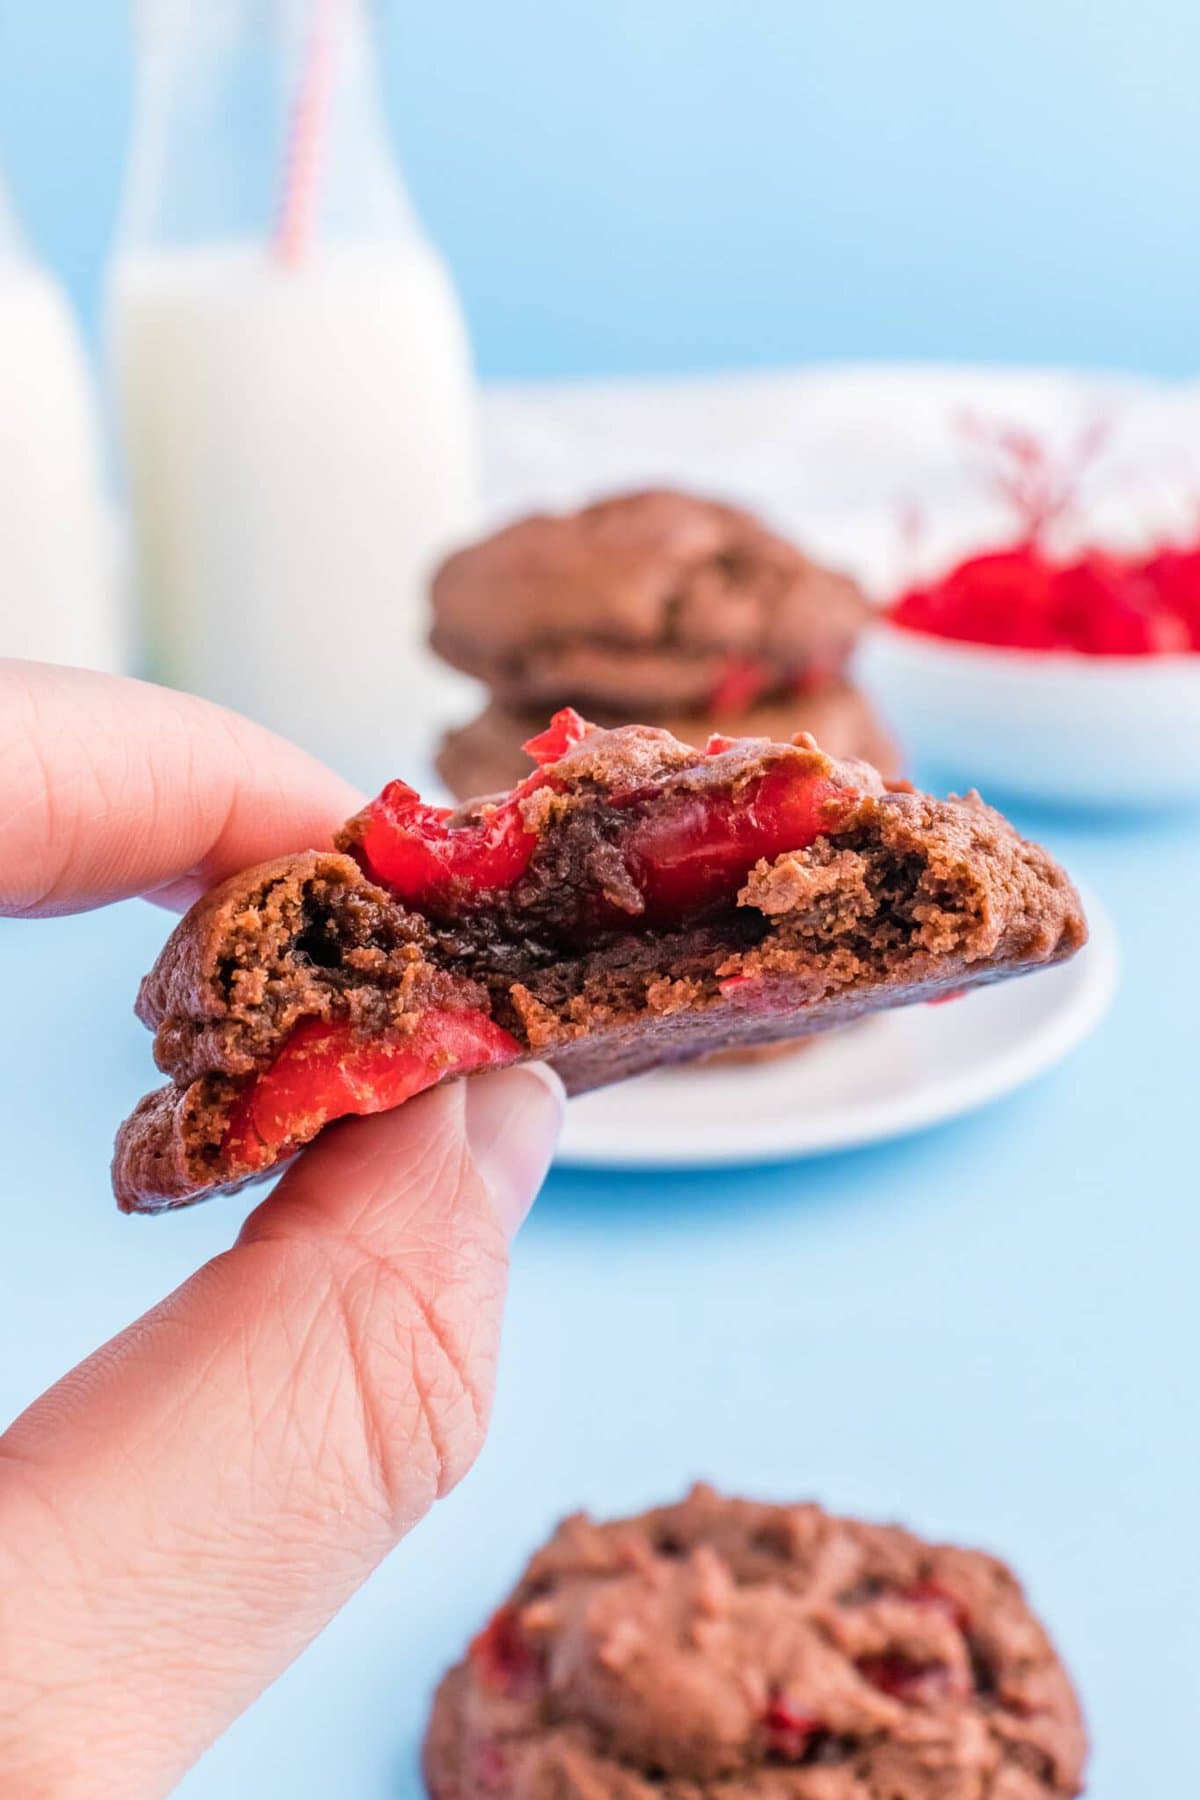 A hand holding the Chocolate Cherry Cookies.